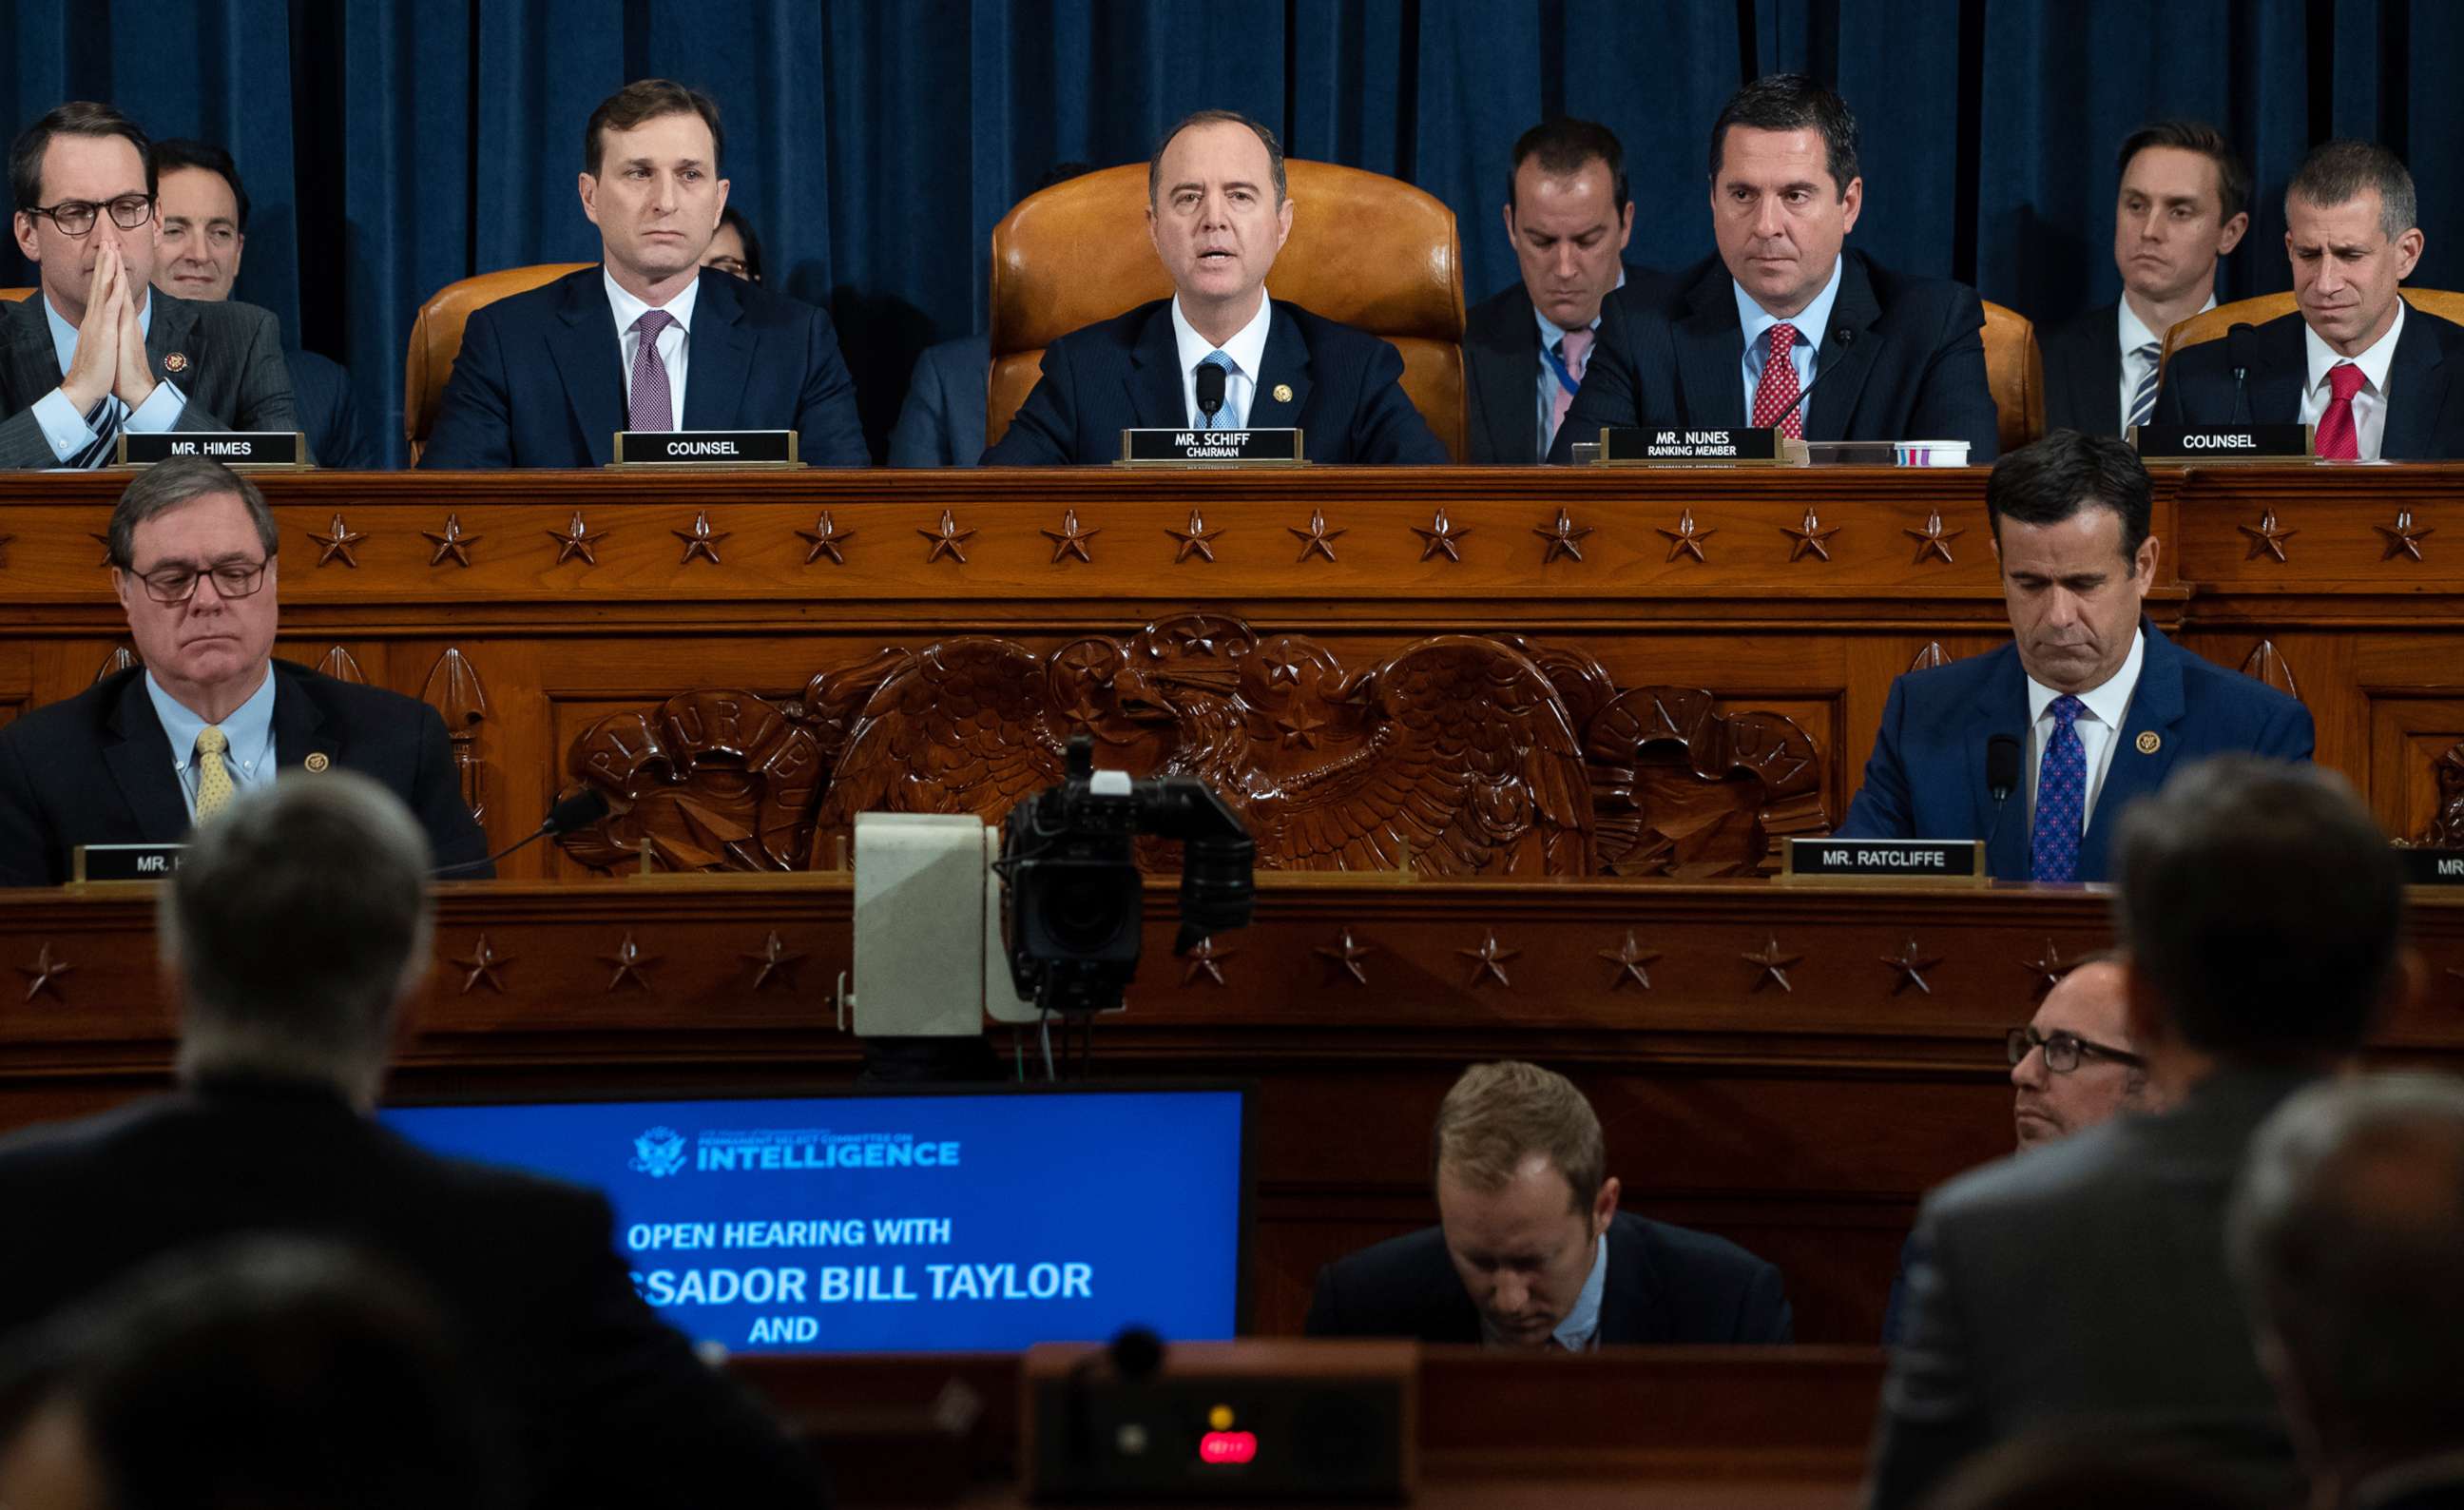 PHOTO: House Intelligence Committee Chairman Adam Schiff gives an opening statement on Capitol Hill, Nov. 13, 2019.